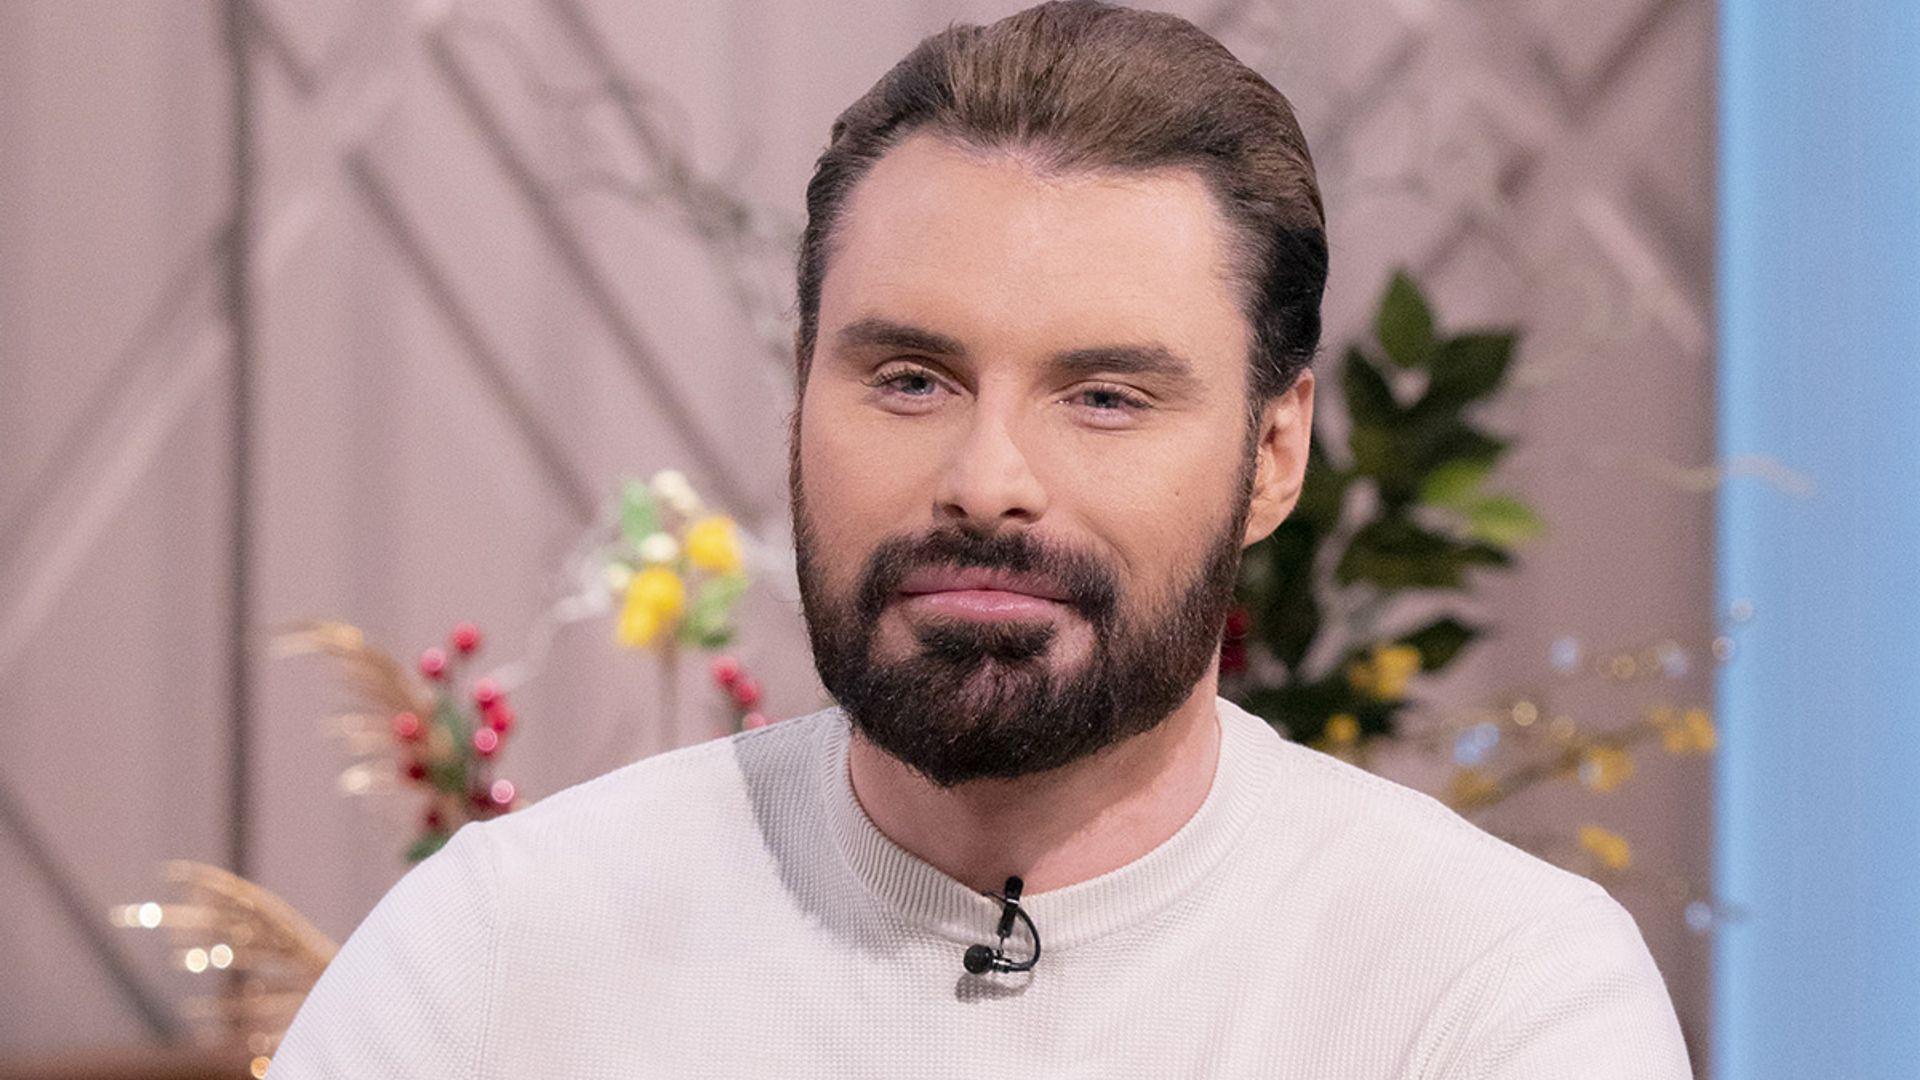 Rylan Clark welcomes new addition to his home after split - and fans are shocked